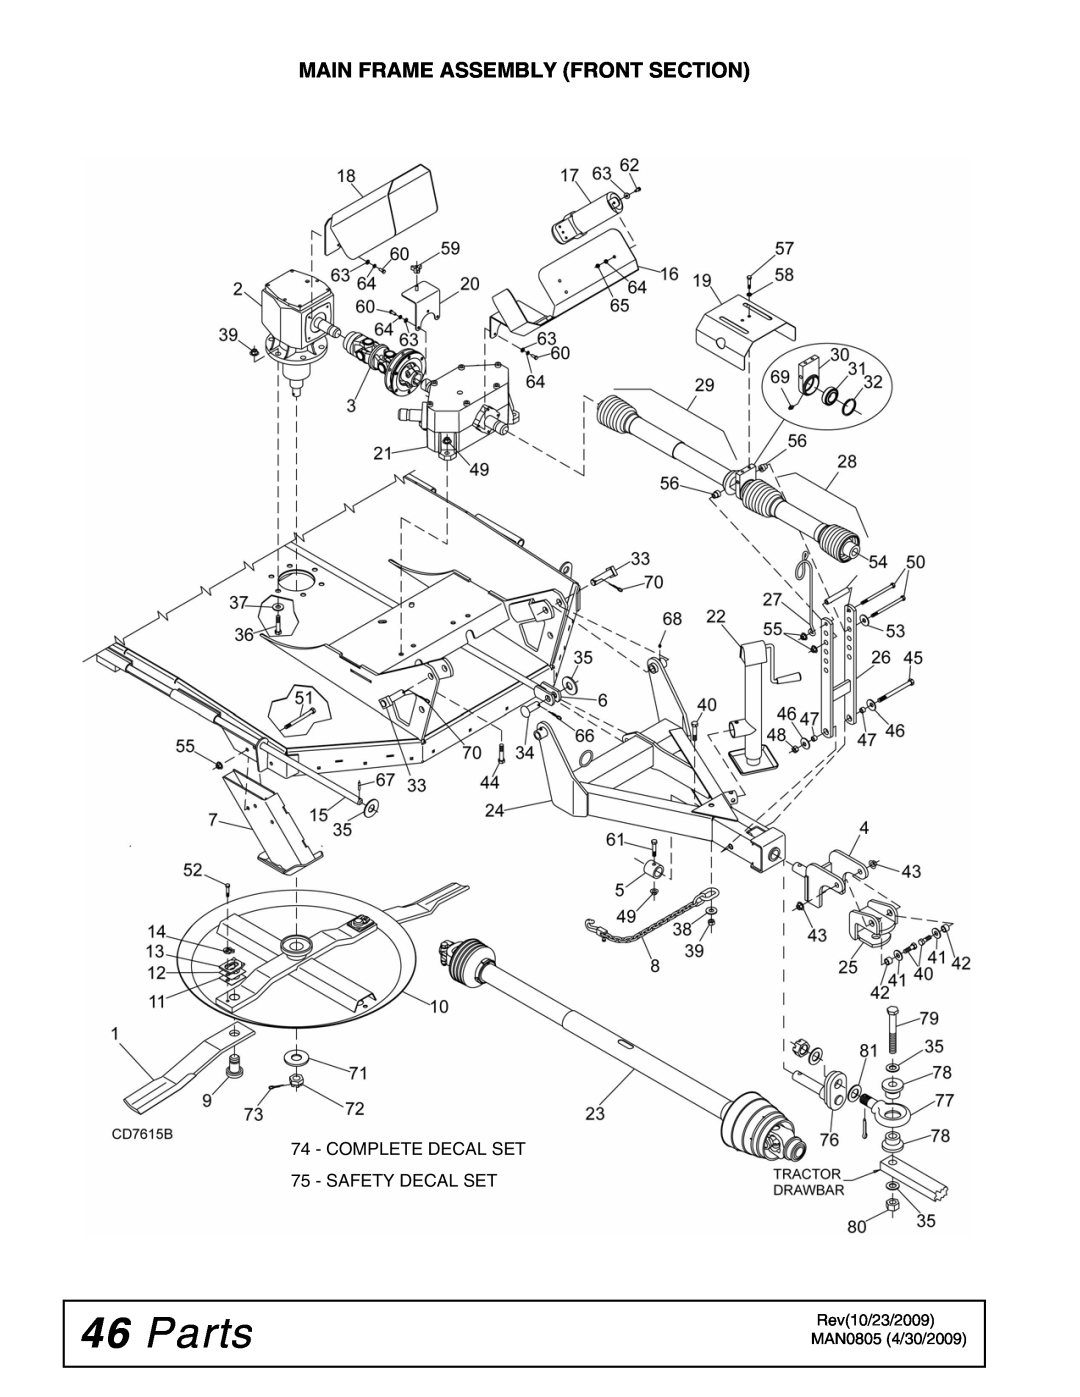 Woods Equipment BW180HBQ, BW126HBQ manual Parts, Main Frame Assembly Front Section 